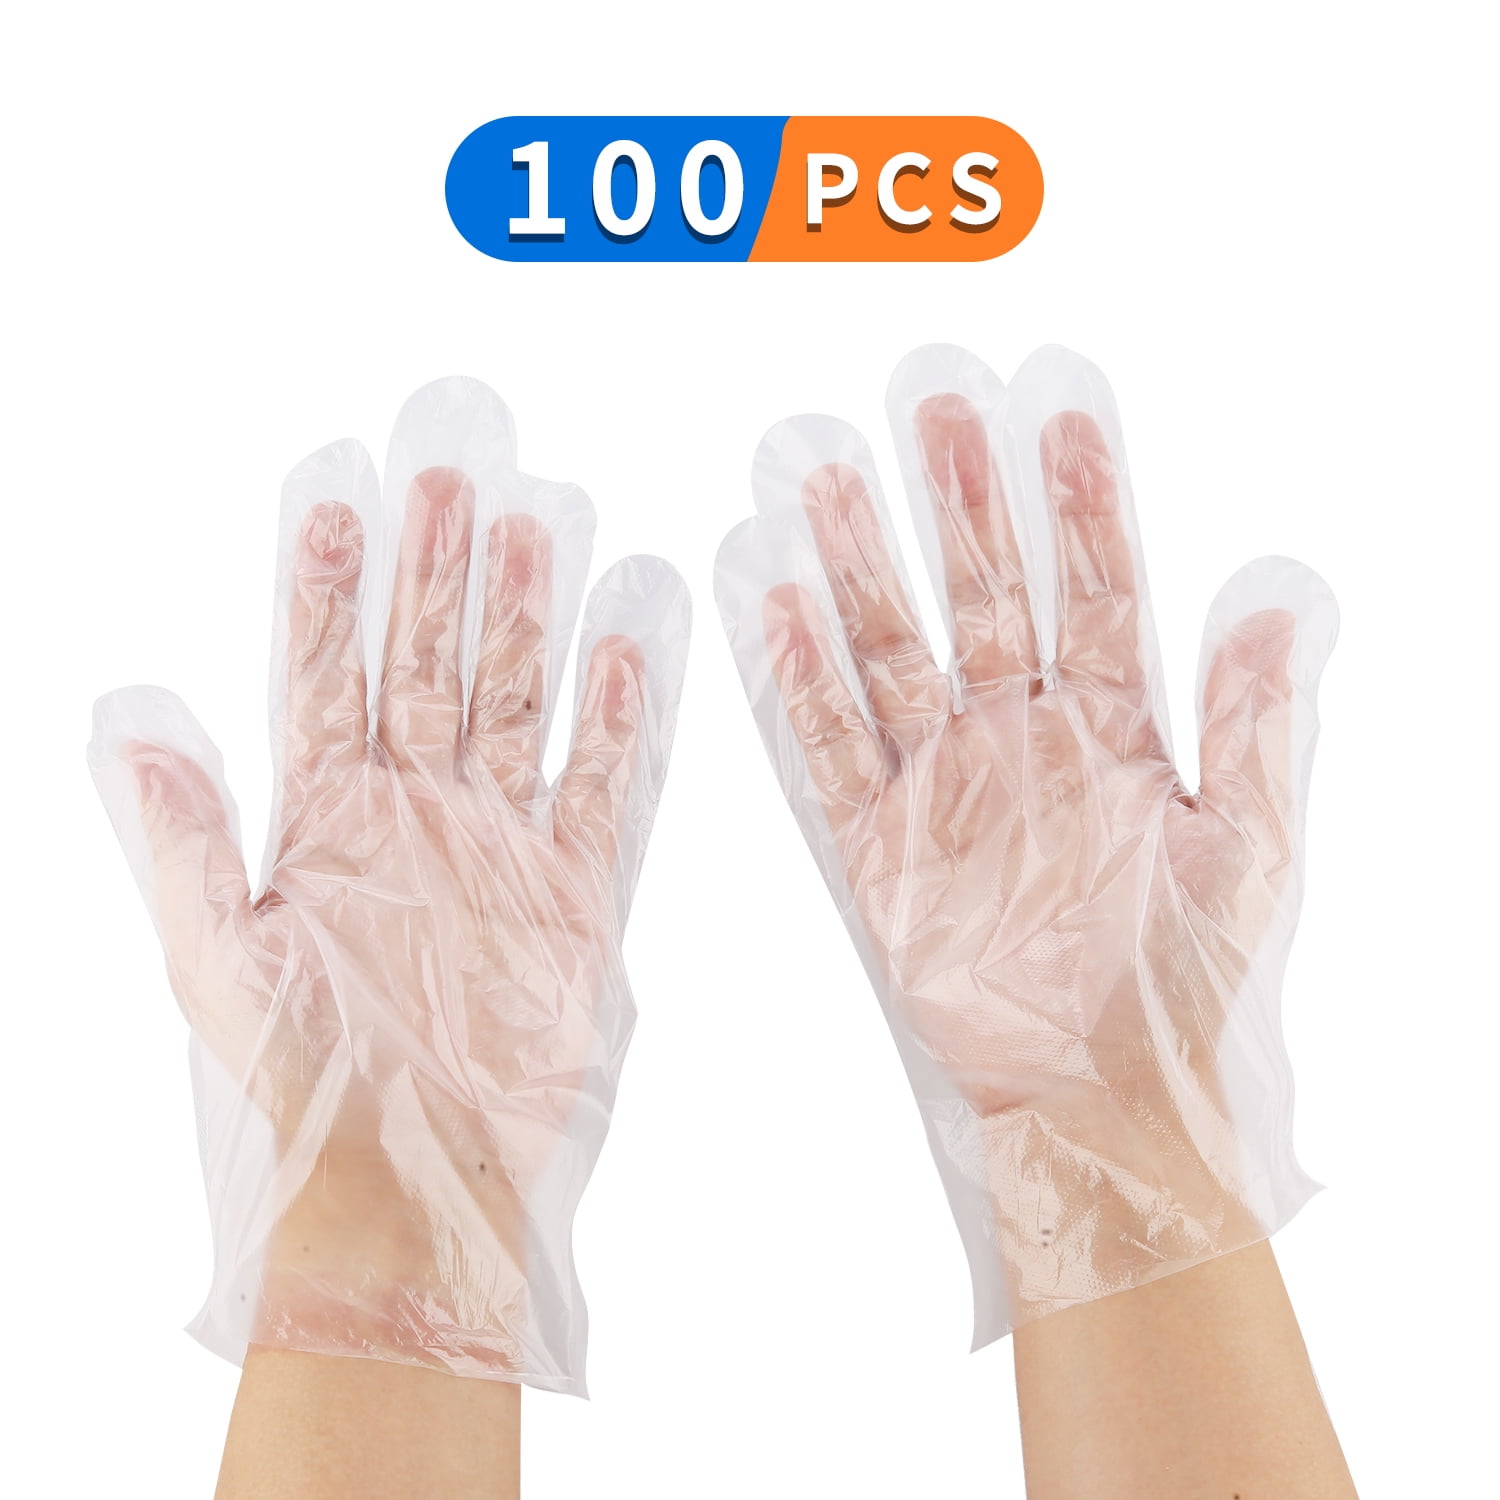 90x CLEAR DISPOSABLE GLOVES One Size Fits All Multi Food Work/Cleaning Hand Care 